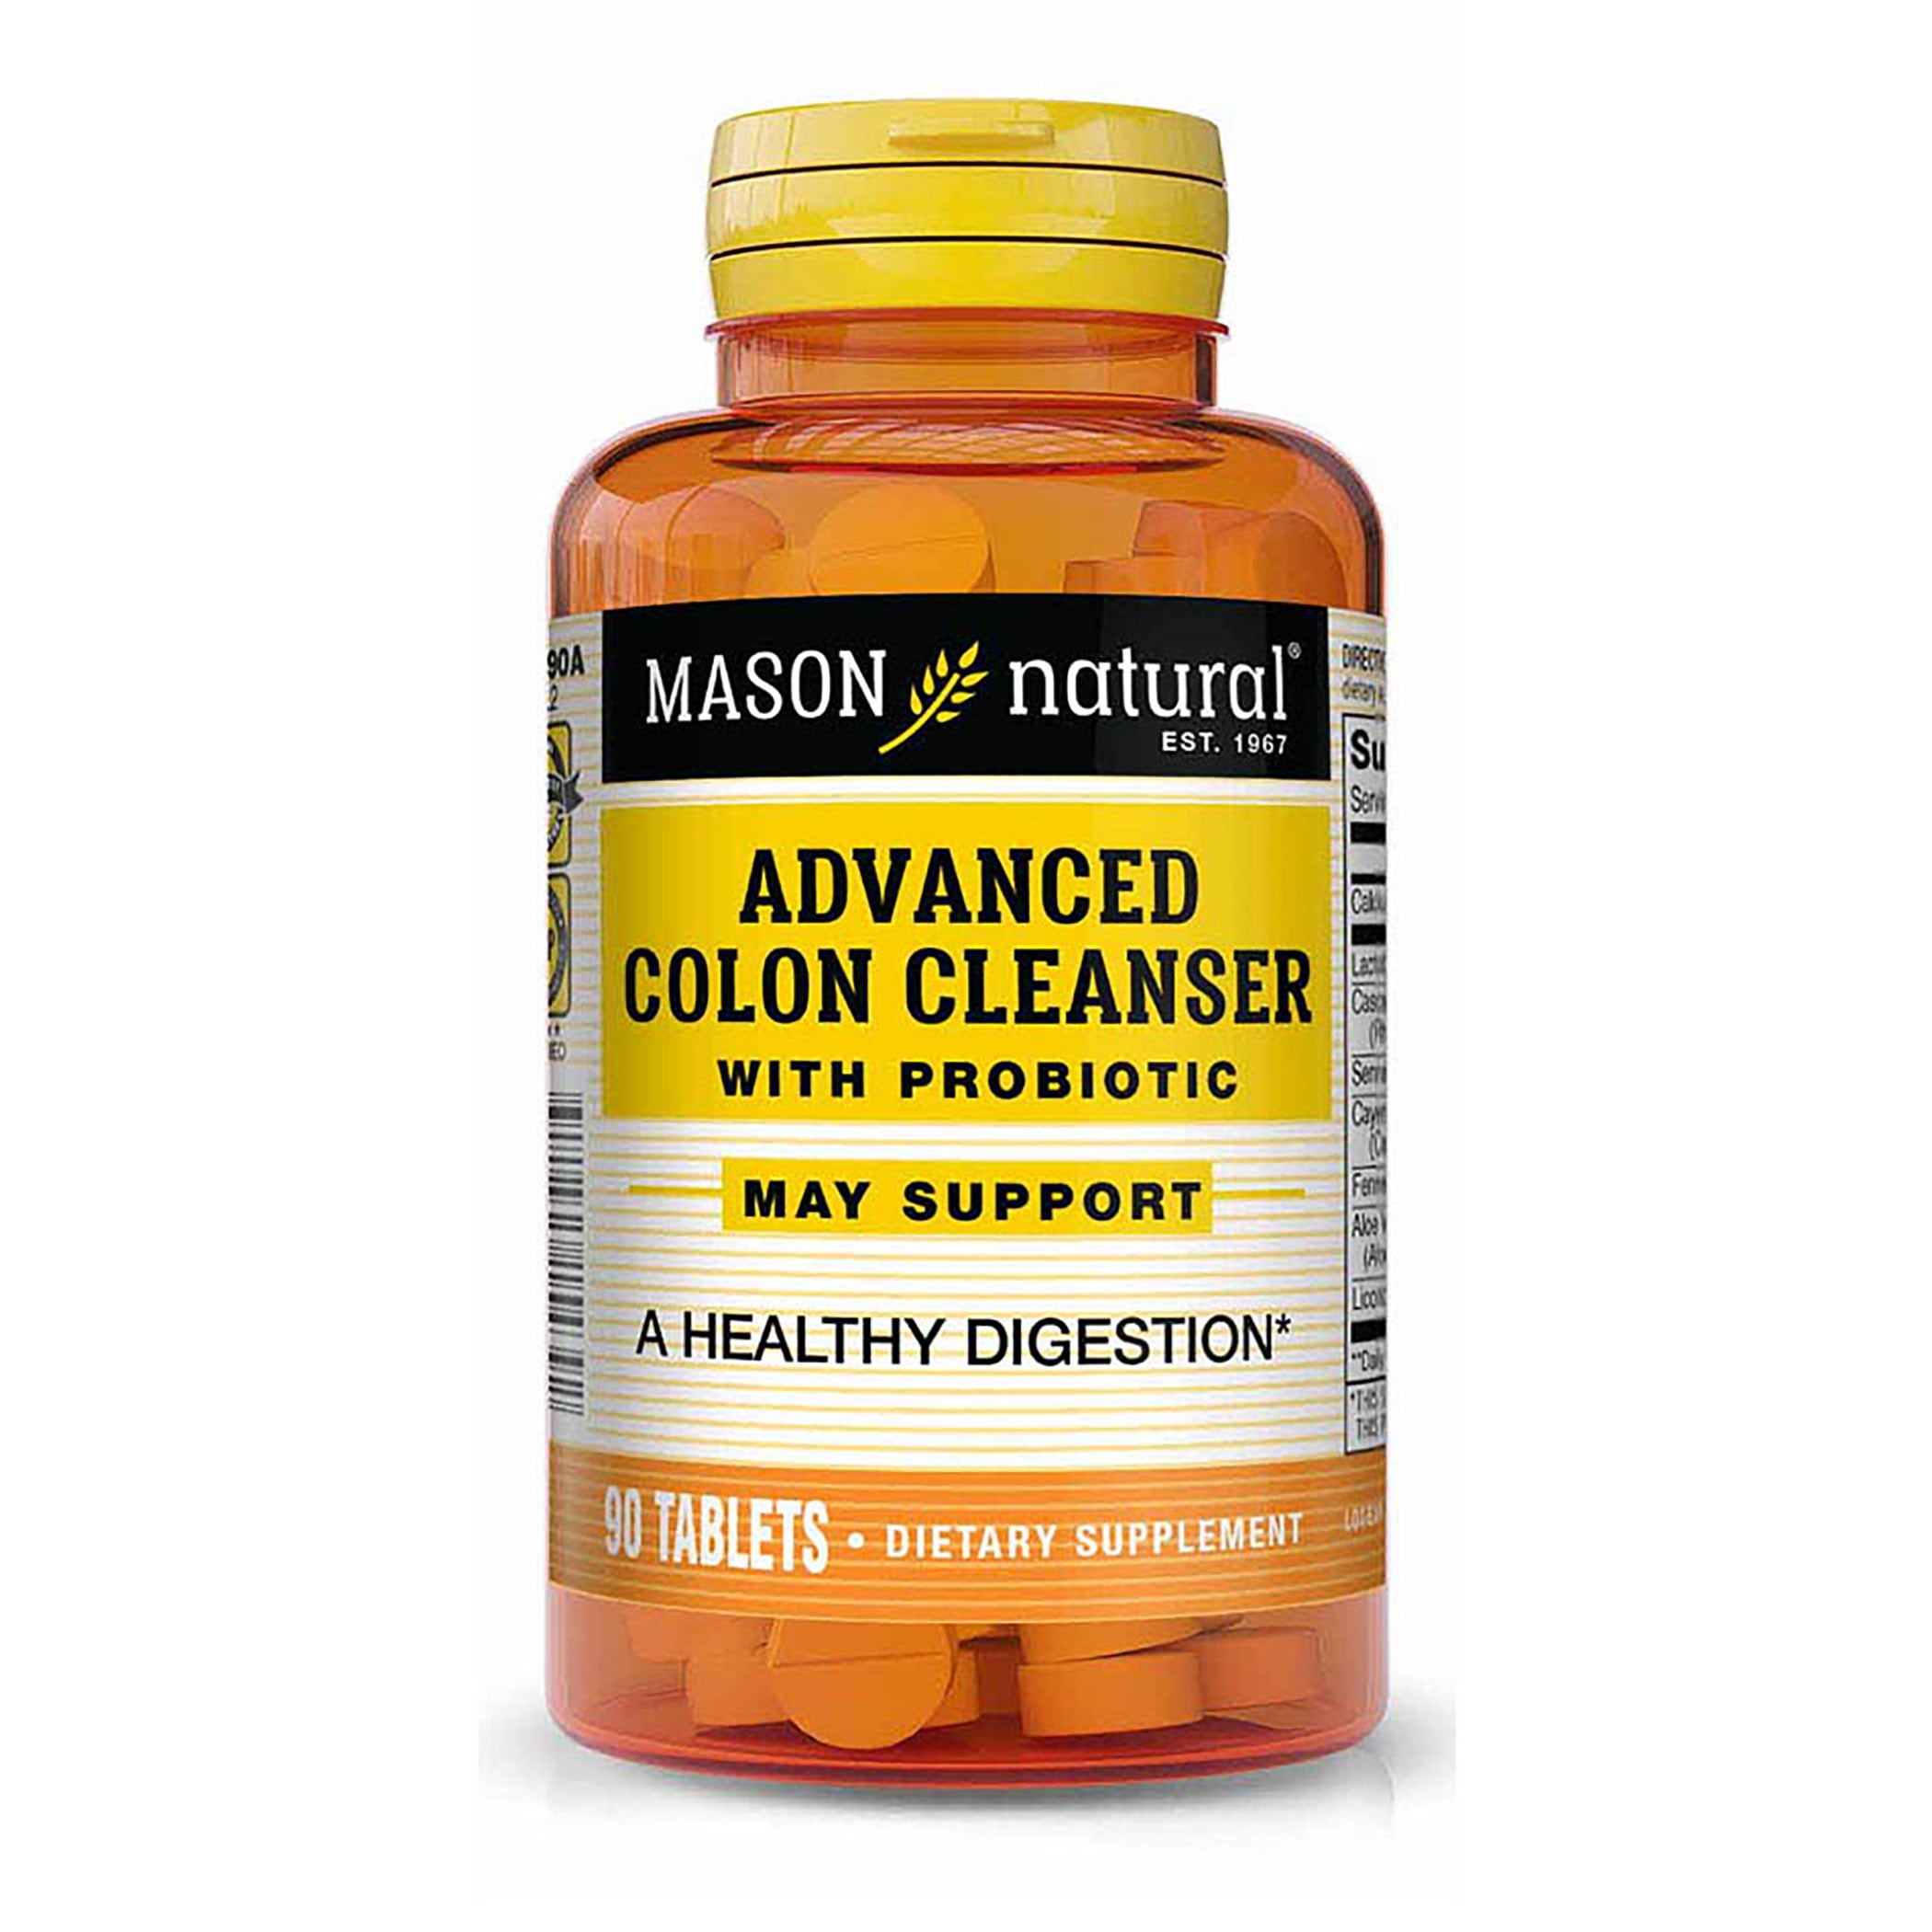 Mason Natural Advanced Colon Cleanser With Probiotic, Calcium, Cascara  Sagrada and Aloe Vera Improved Digestive Health, Healthy Bowel Function   Detoxification, 90 Tablets